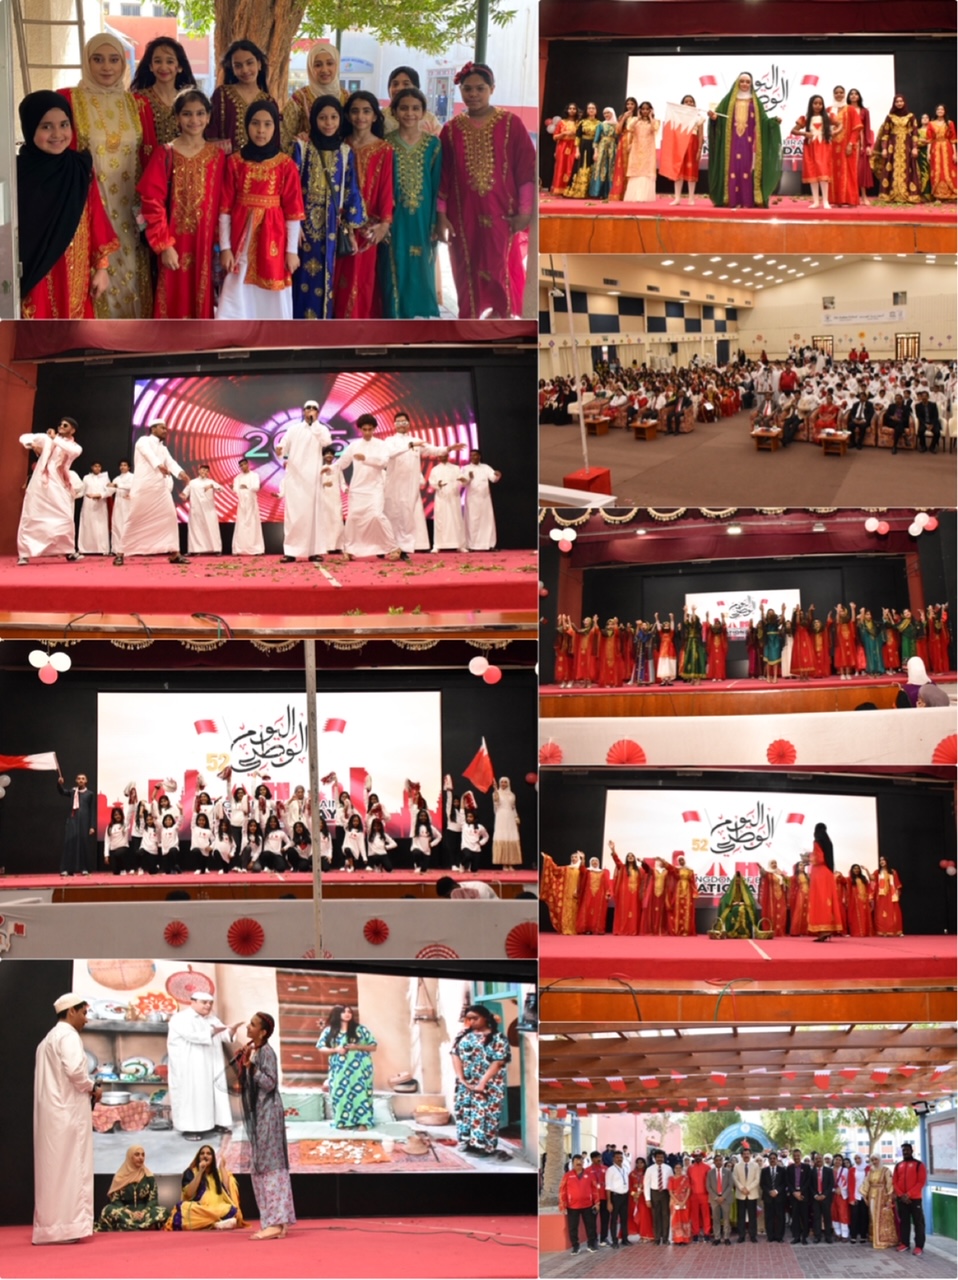 The Indian School celebrates Bahrain National Day